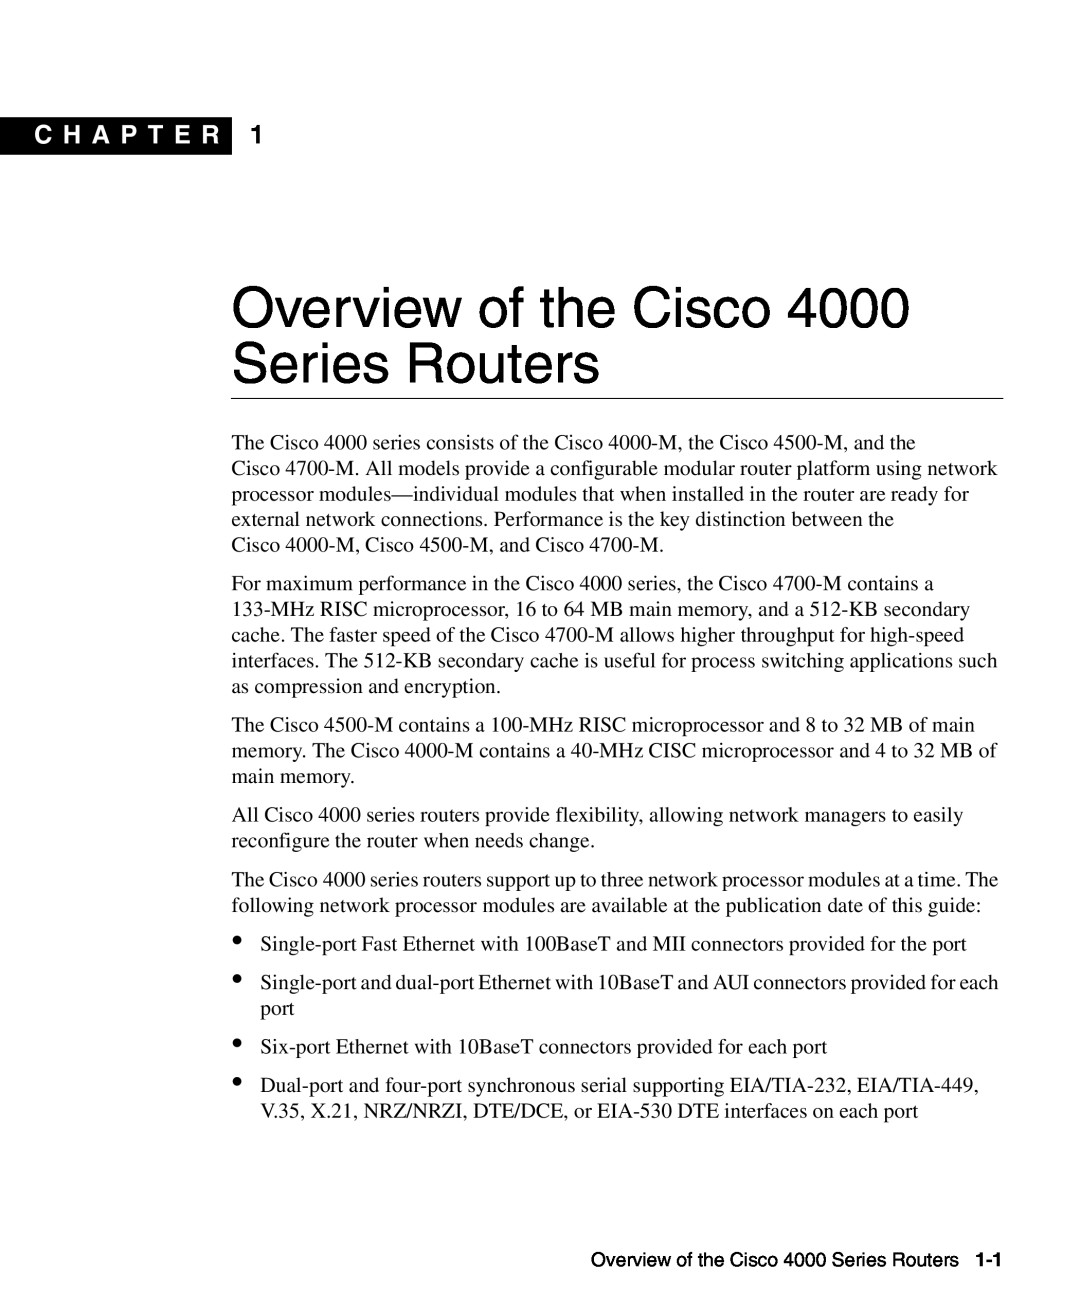 Cisco Systems 4000 manual Overview of the Cisco Series Routers, C H A P T E R 